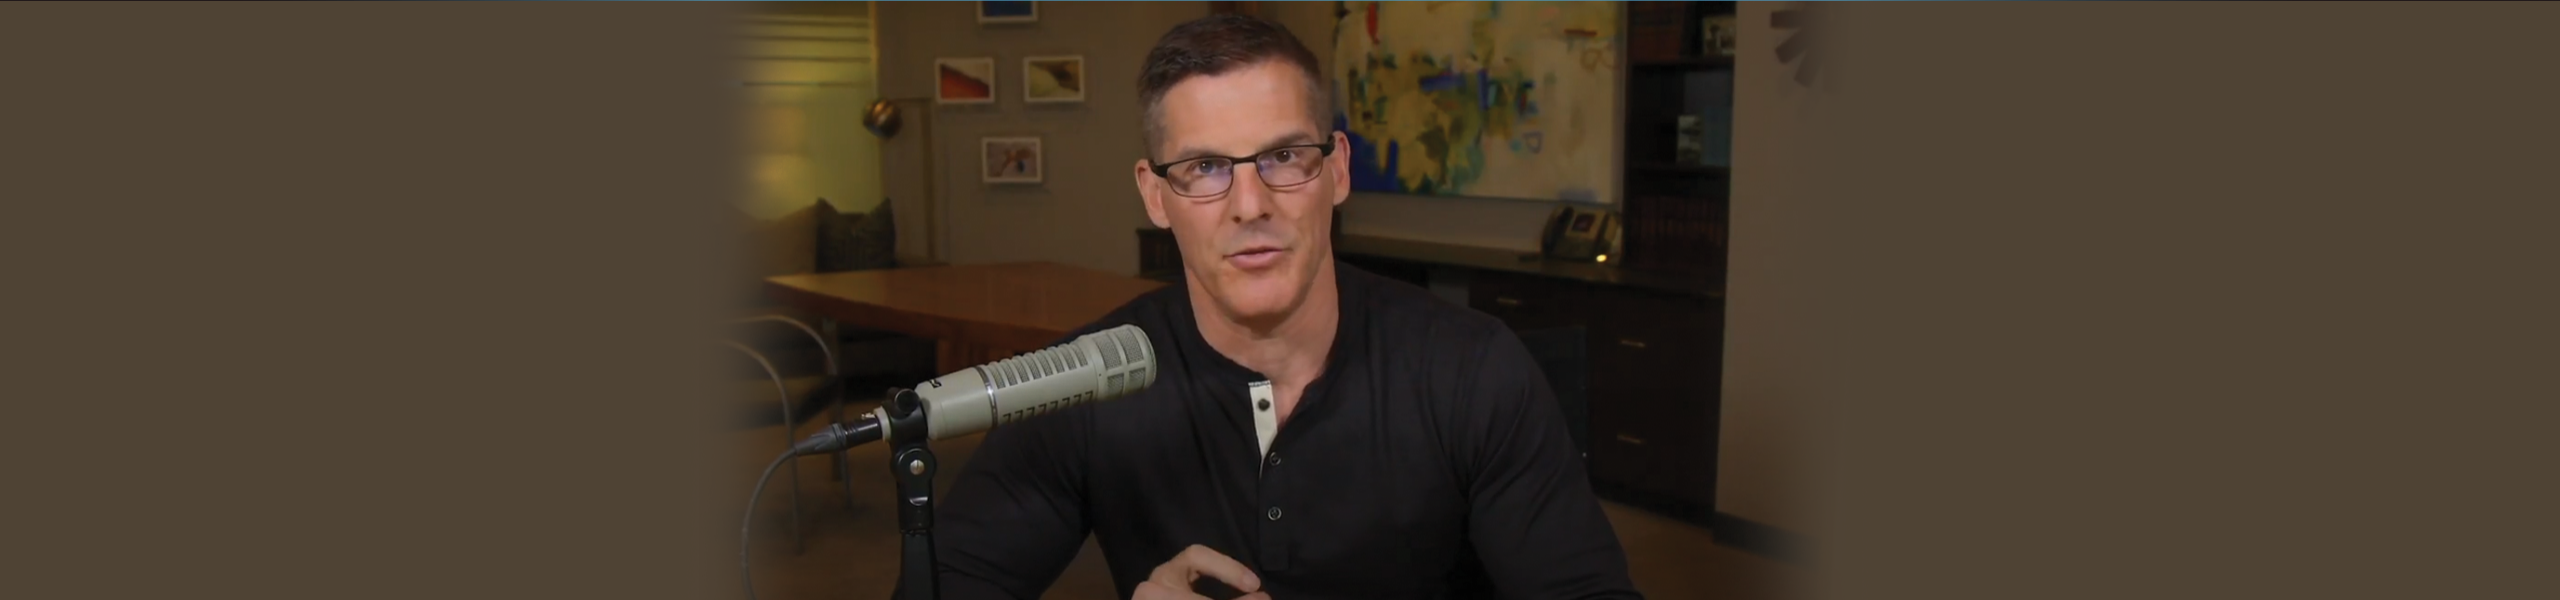 Answering Your Questions | Craig Groeschel 